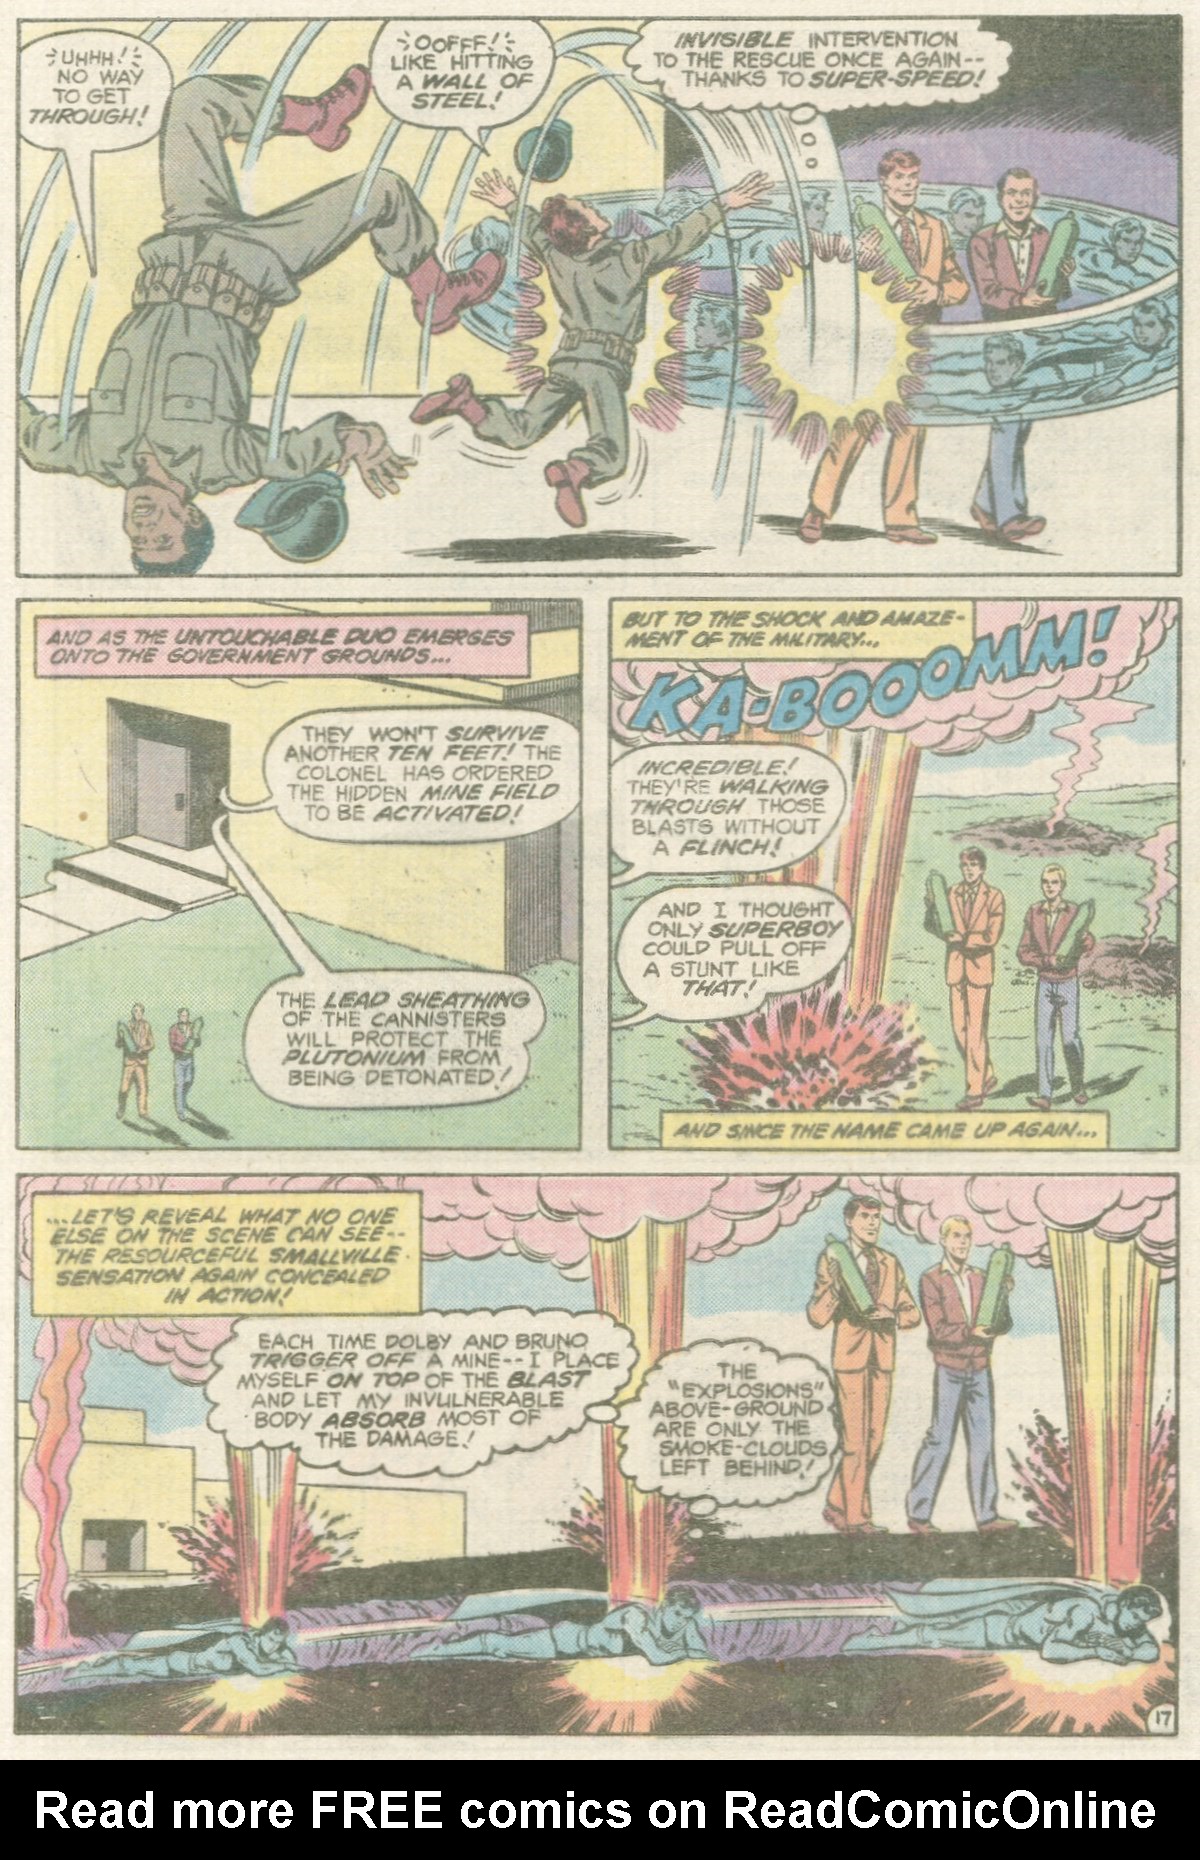 The New Adventures of Superboy 26 Page 17